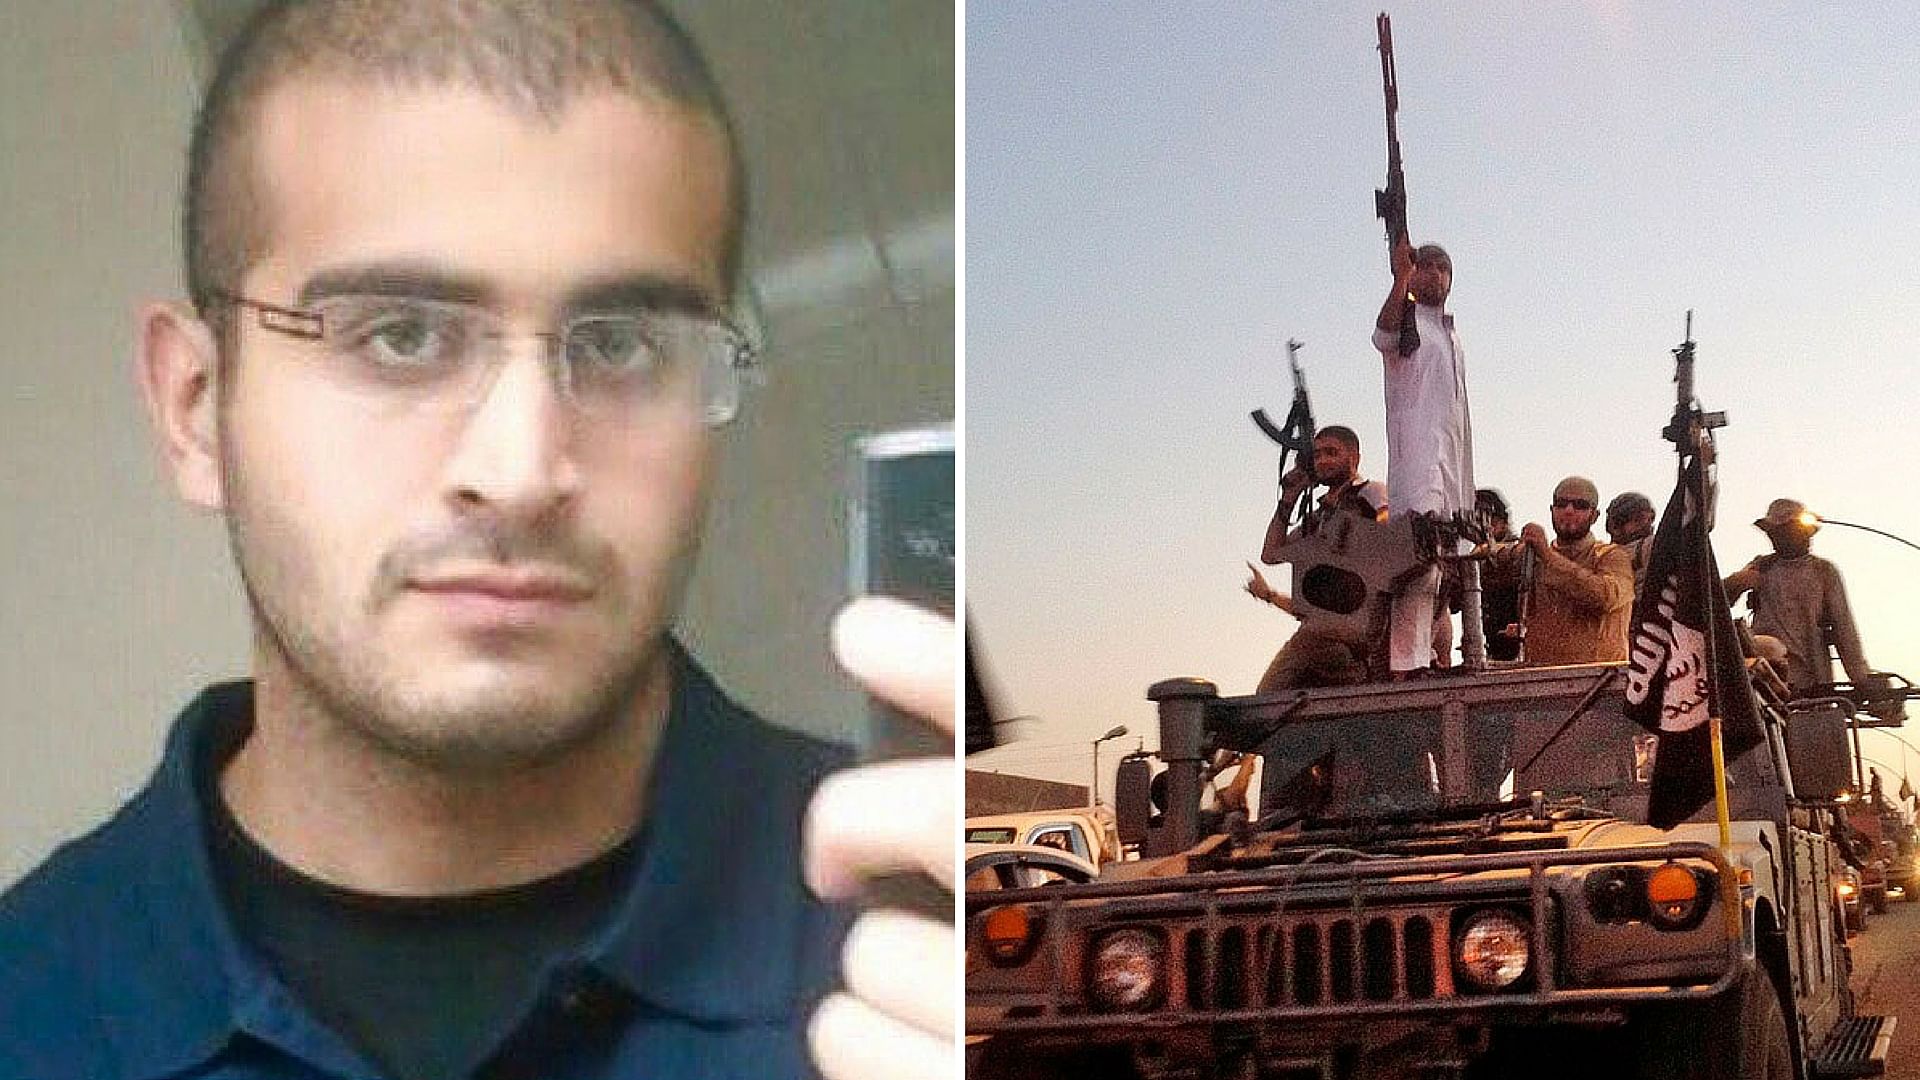 Orlando shooter Omar Mateen (L) and ISIS fighters (R). Photo used for representational purpose. (Photo: <b>The Quint</b>)